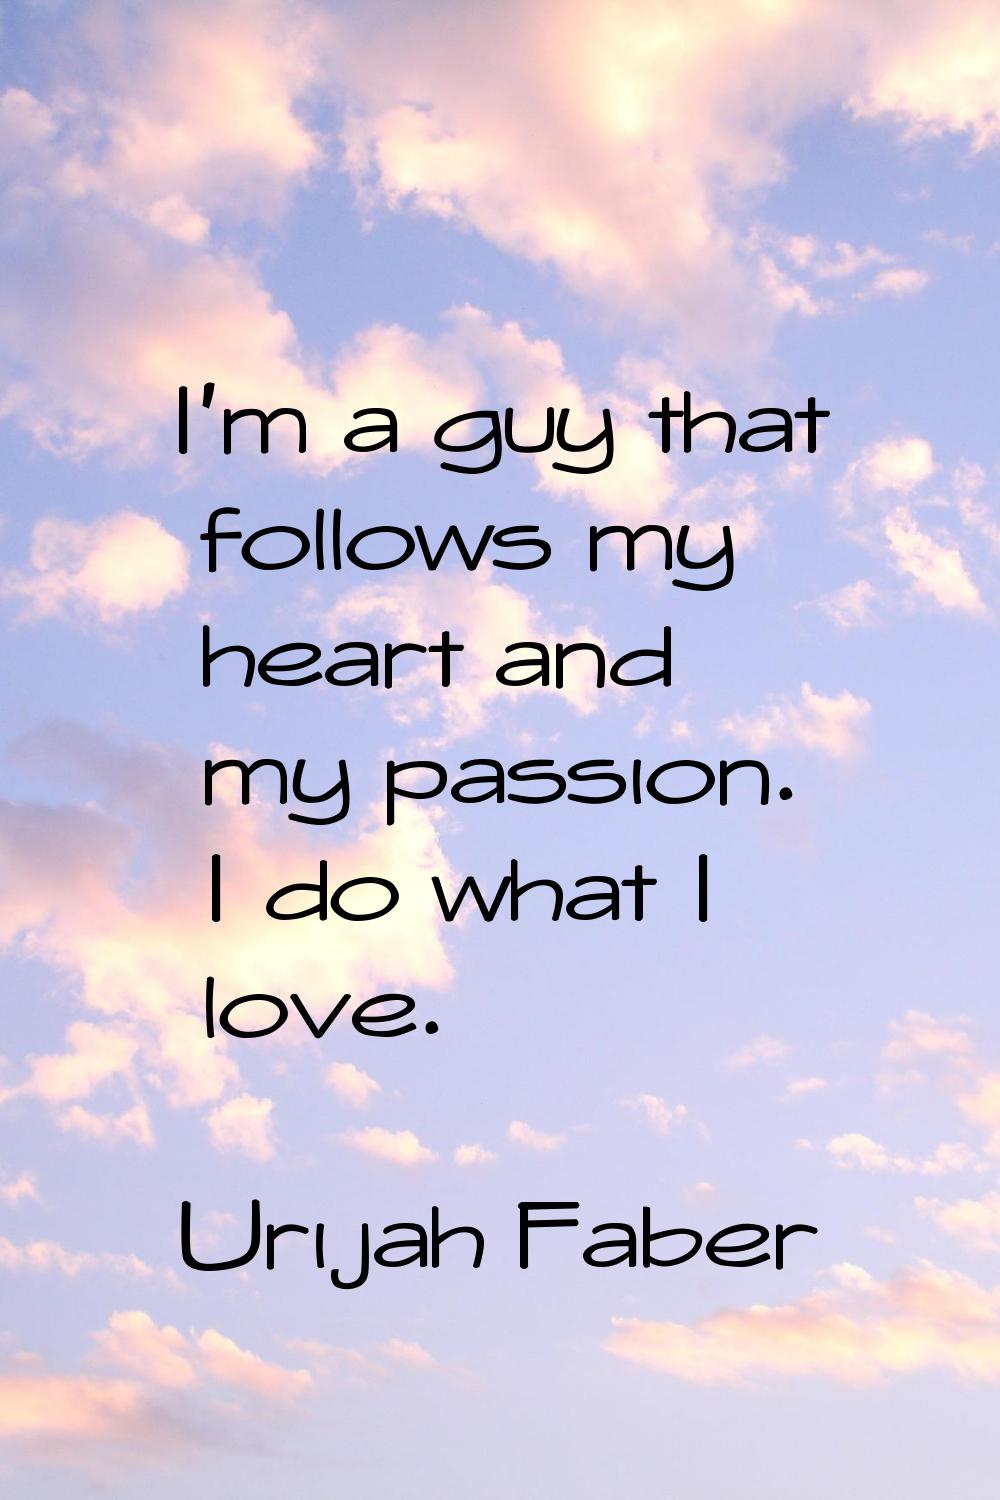 I'm a guy that follows my heart and my passion. I do what I love.